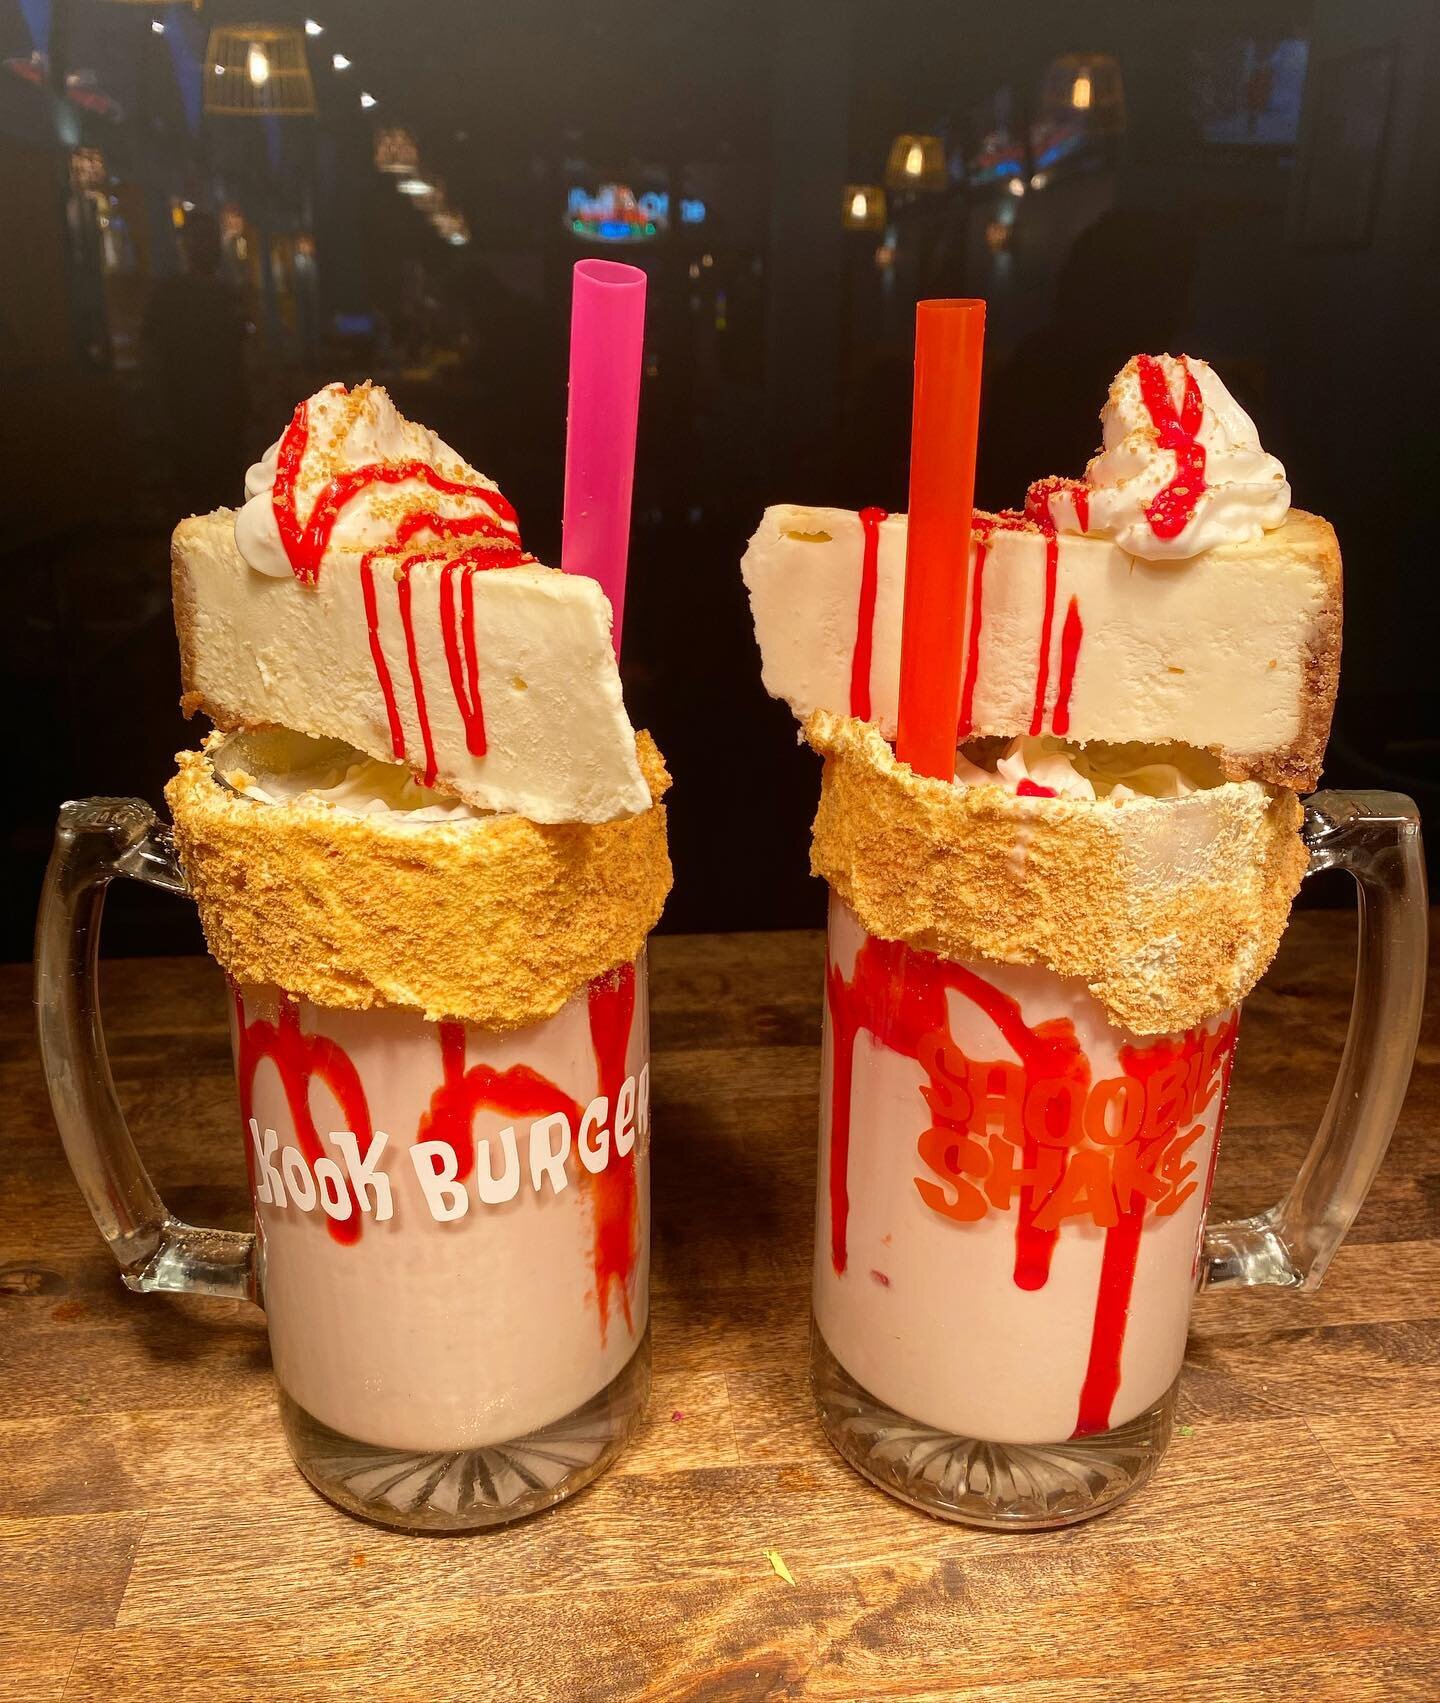 Twinning never tasted so good! 😍🍦👯&zwj;♀️ Our Sunburnt Berry Shoobie Shakes are a match made in dessert heaven, especially when topped with our decadent cheesecake. Who's ready for a double dose of deliciousness? 🤤 #twinning #shoobieshakes #sunbu